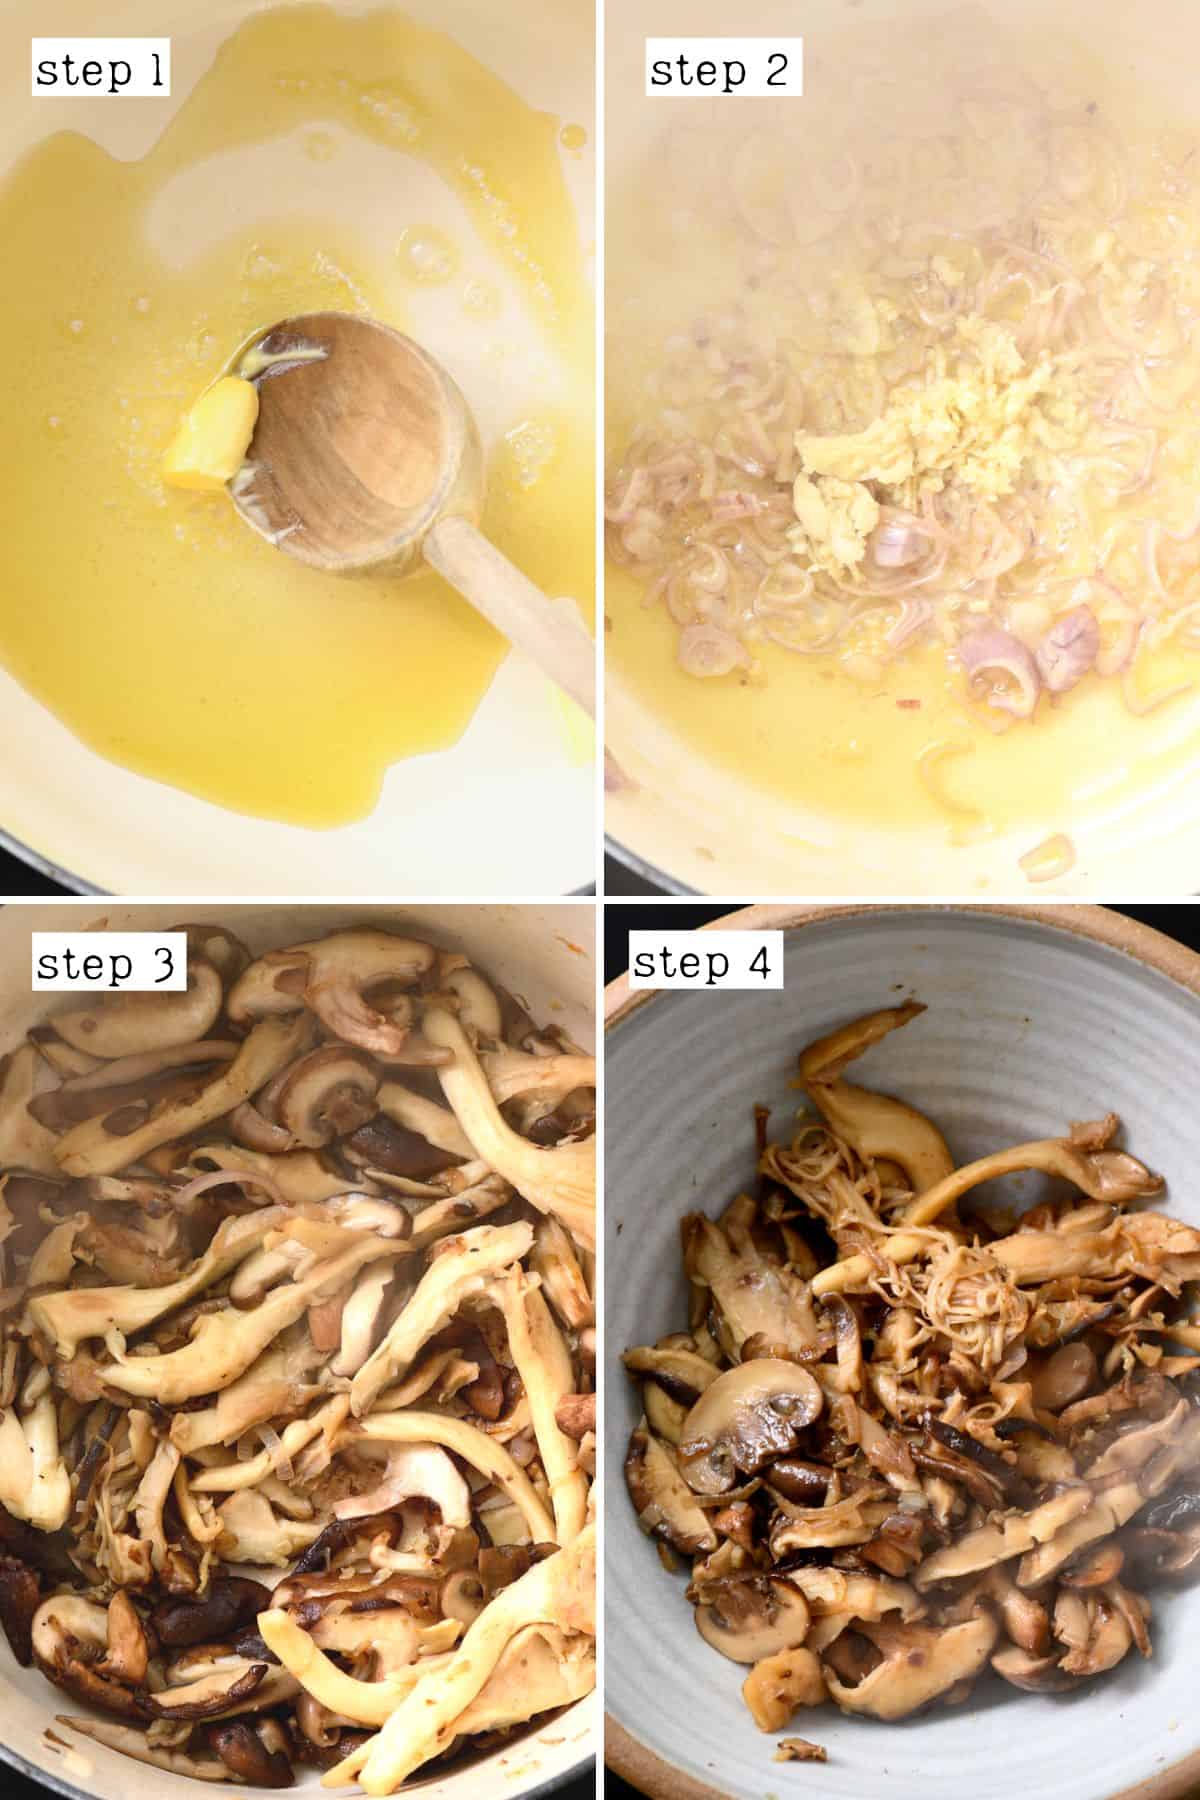 Steps for cooking mushrooms